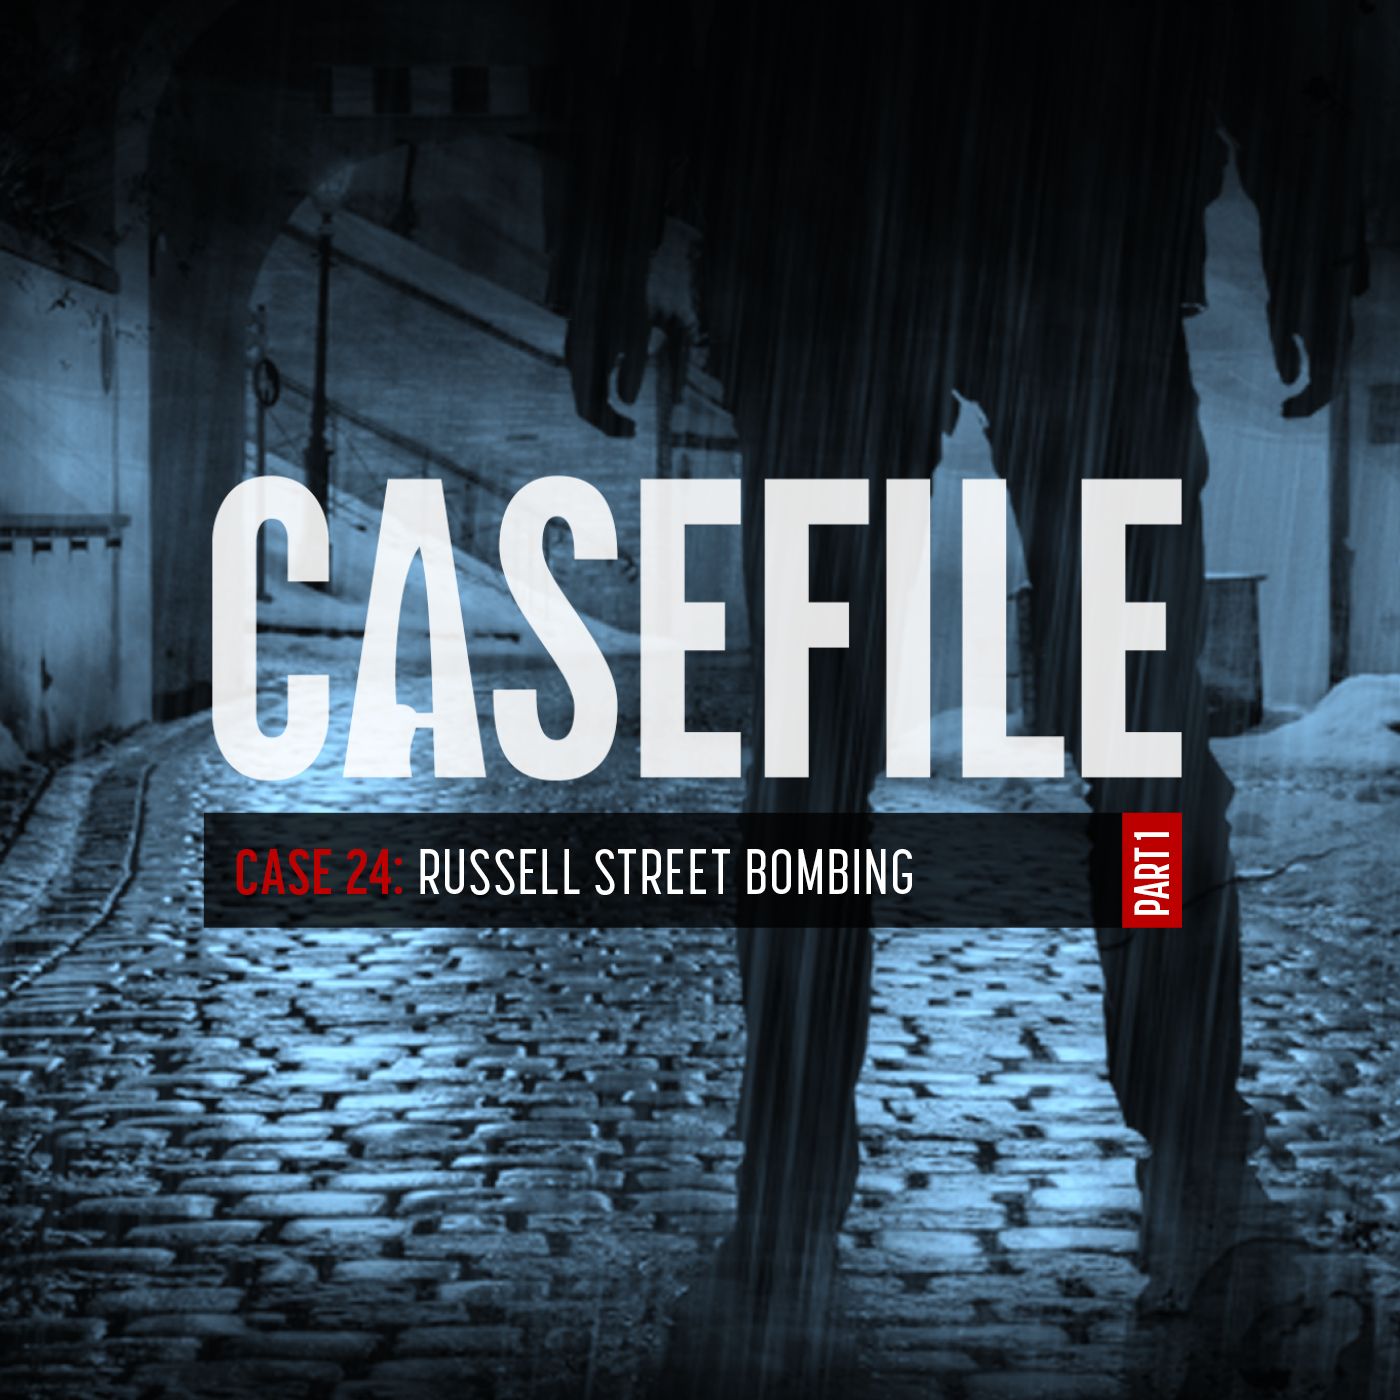 Case 24: Russell Street Bombing (Part 1)